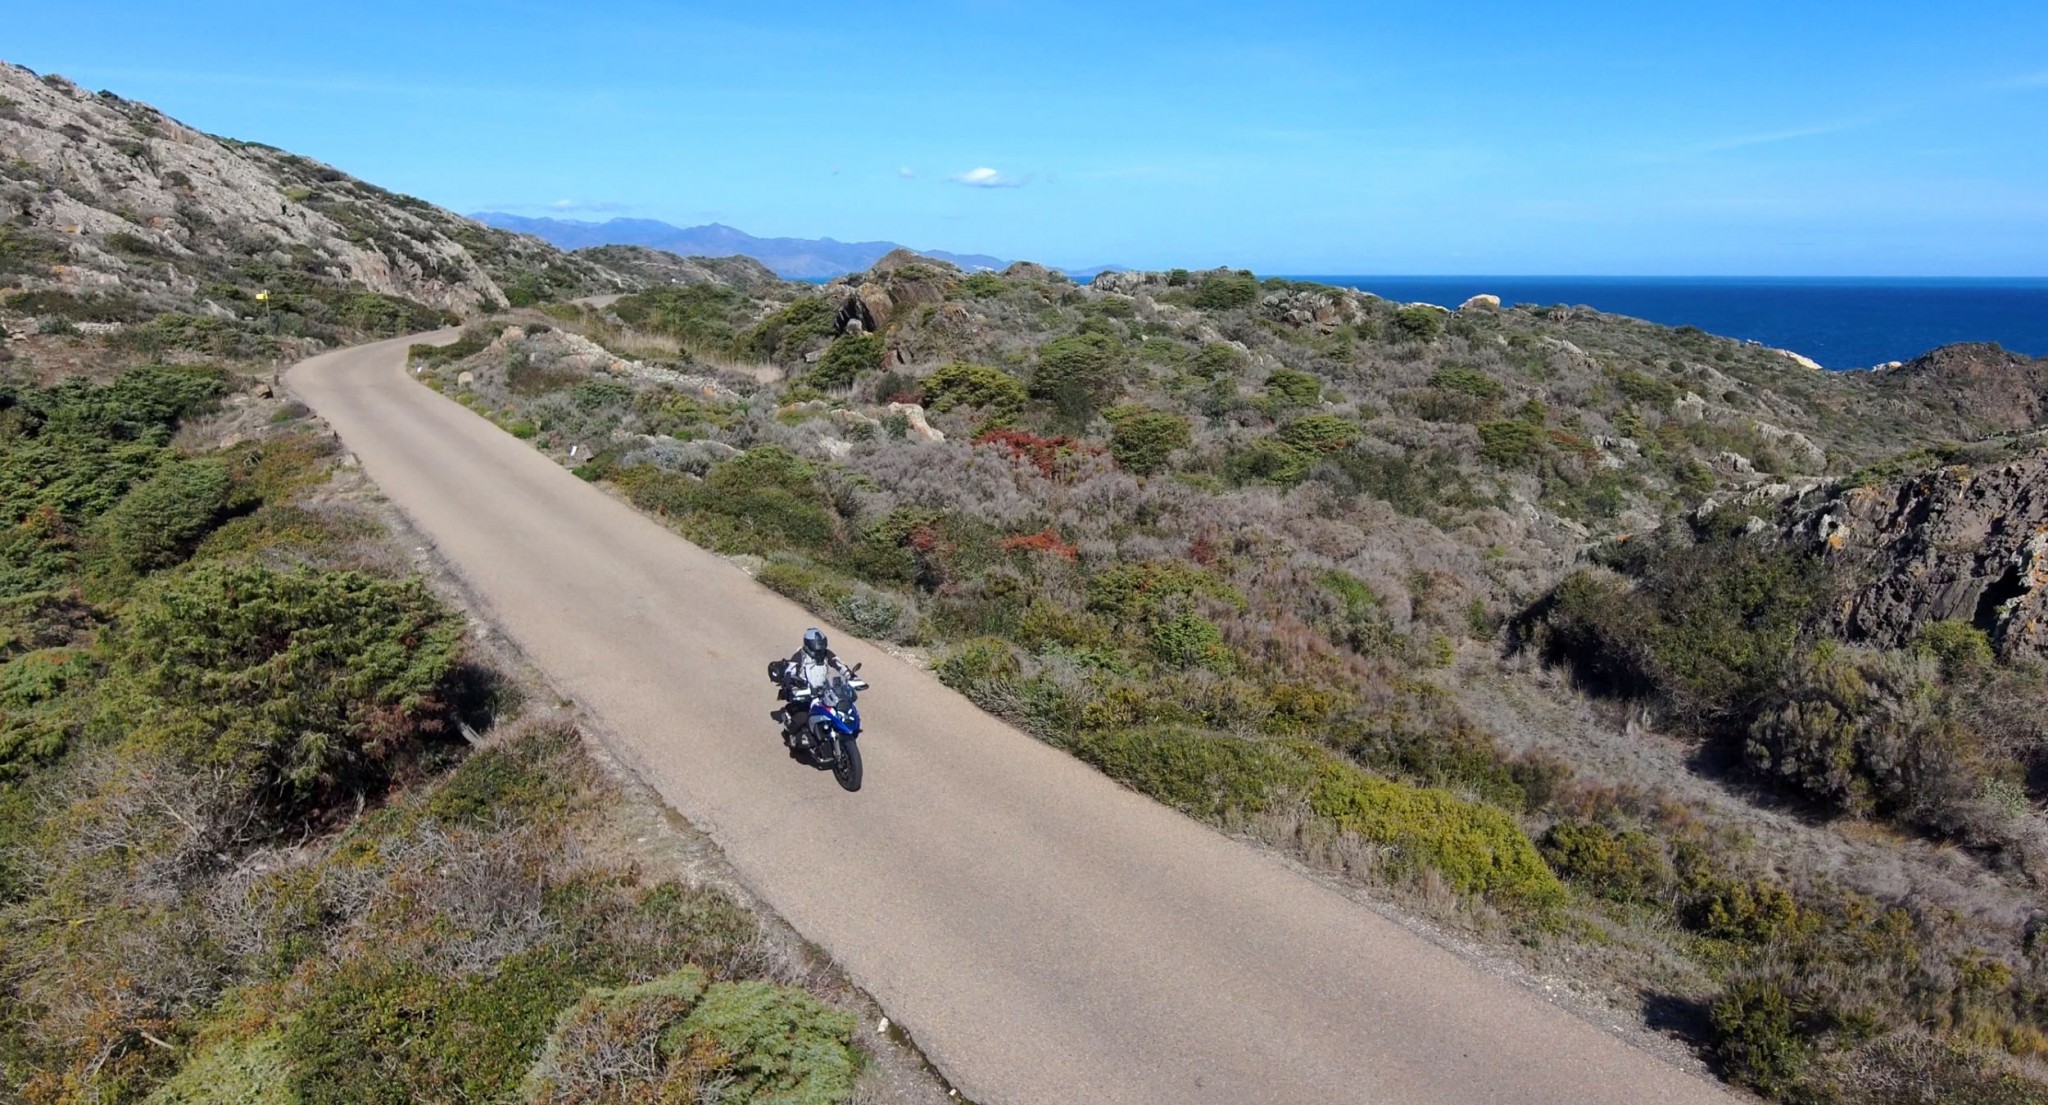 BMW R 1300 GS road test - from Barcelona to Vienna - Image 10